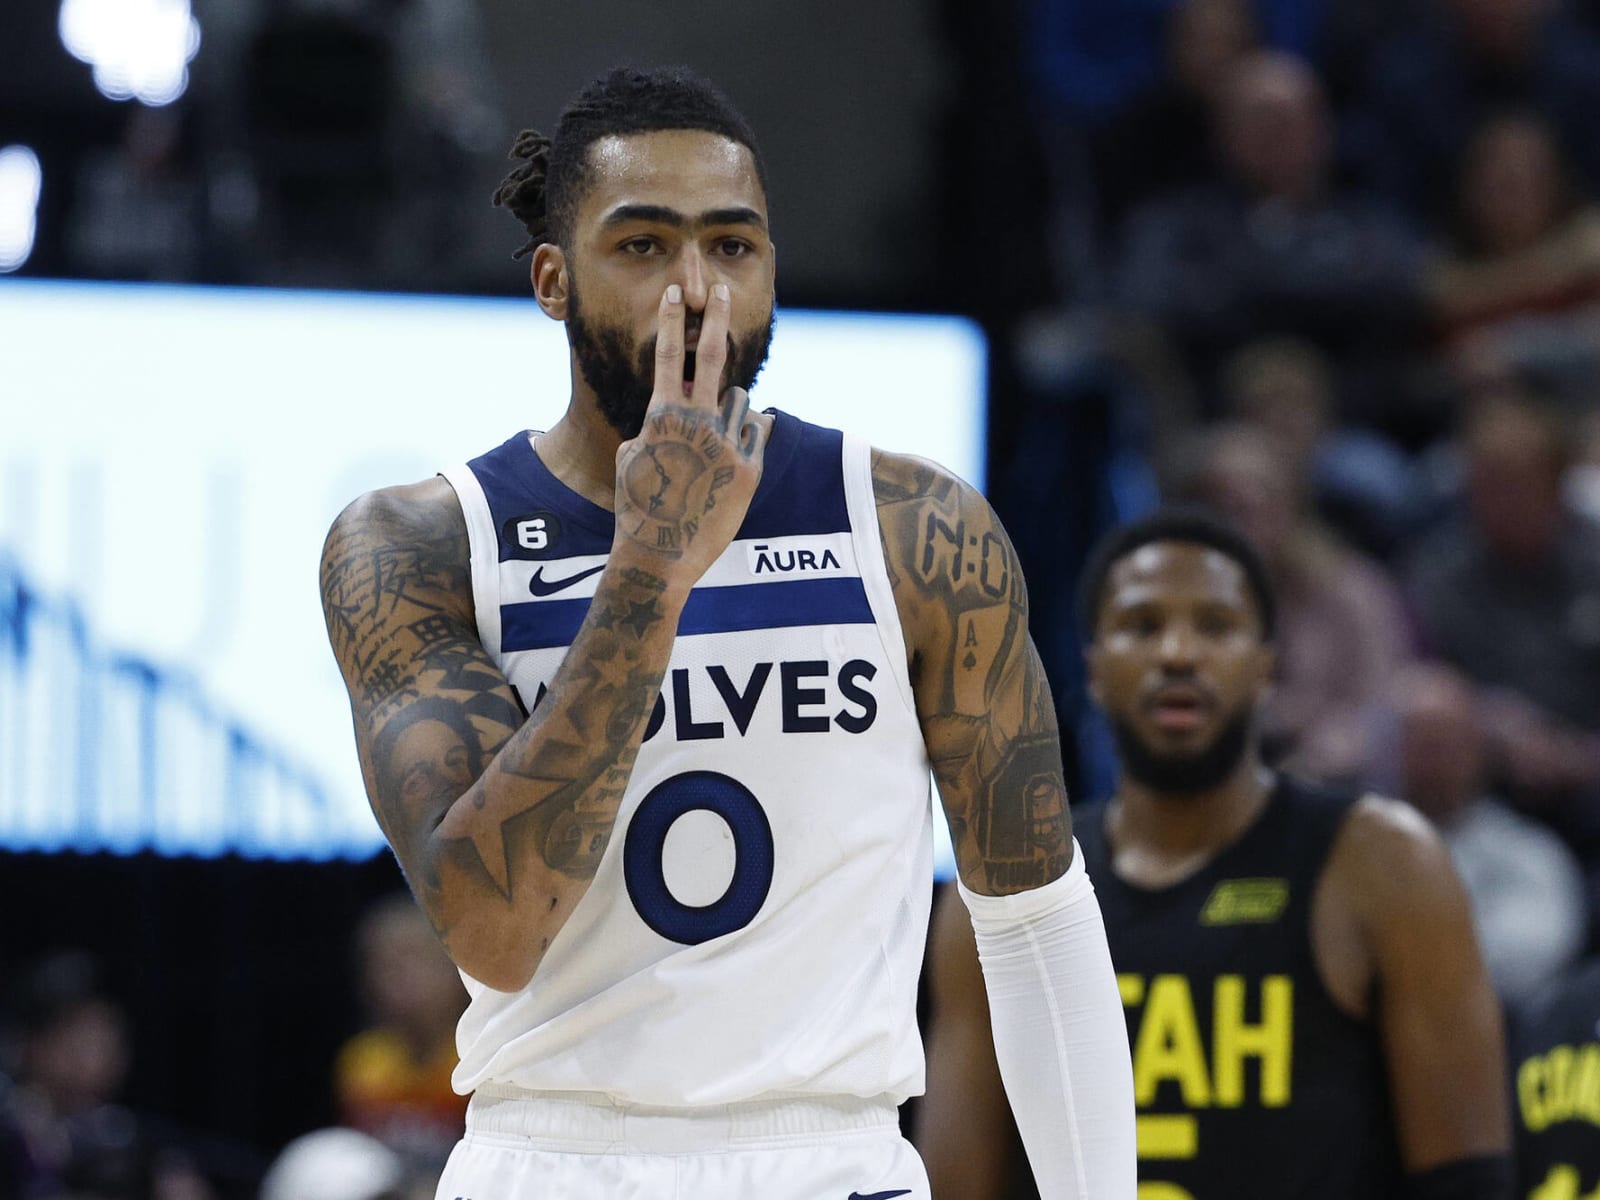 Timberwolves guard D'Angelo Russell says 'nothing changes' in